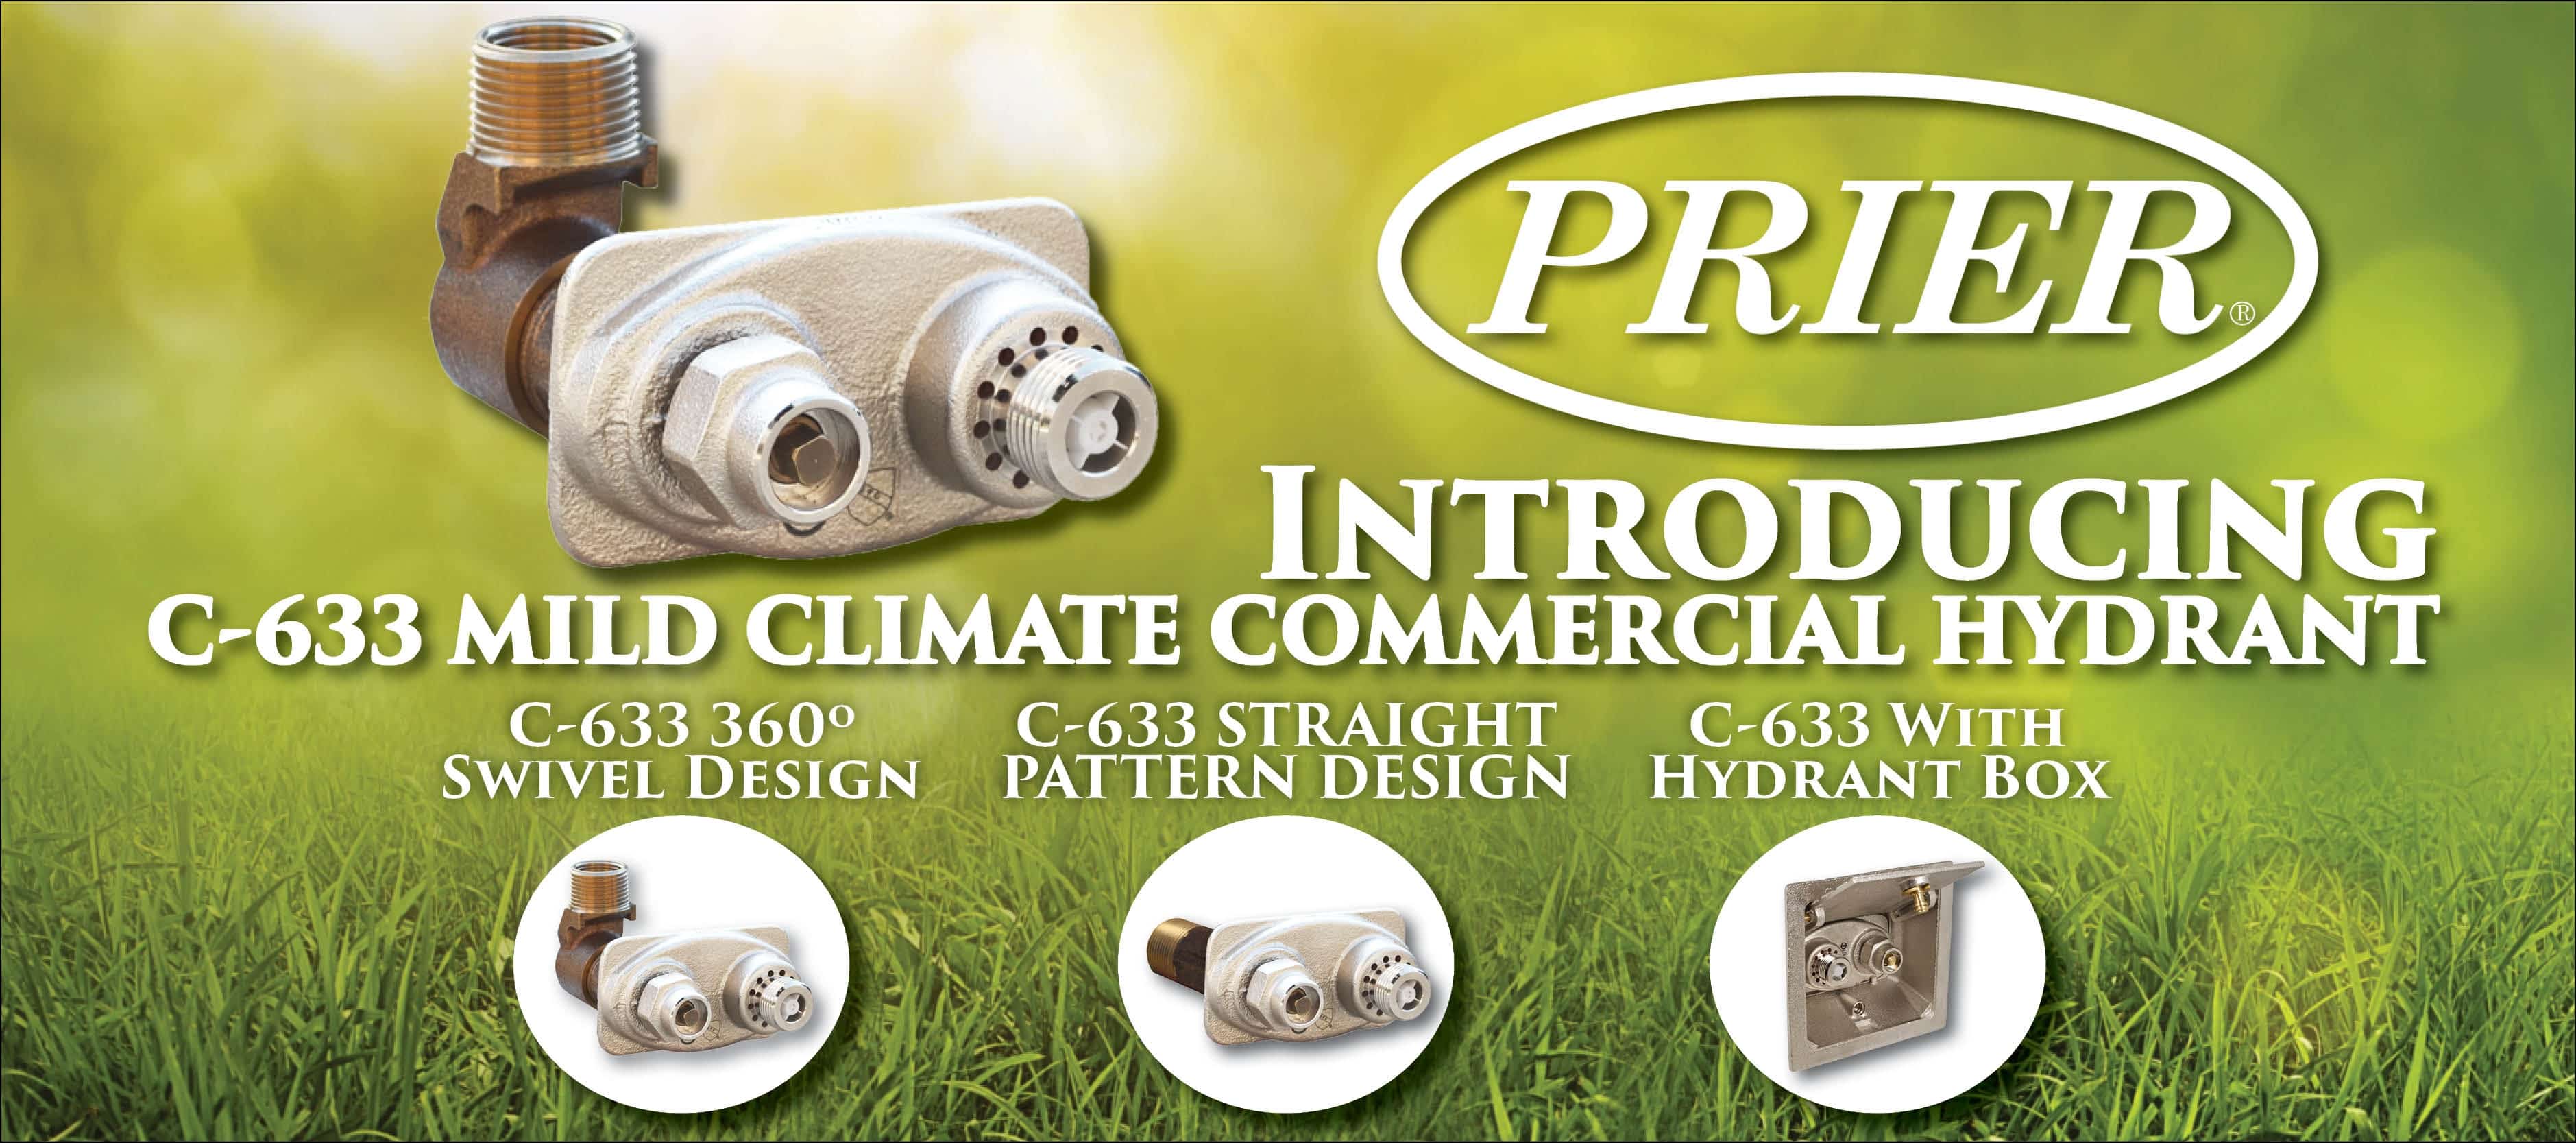 PRIER Announces New Product: C-633 Mild Climate Commercial Wall Hydrant